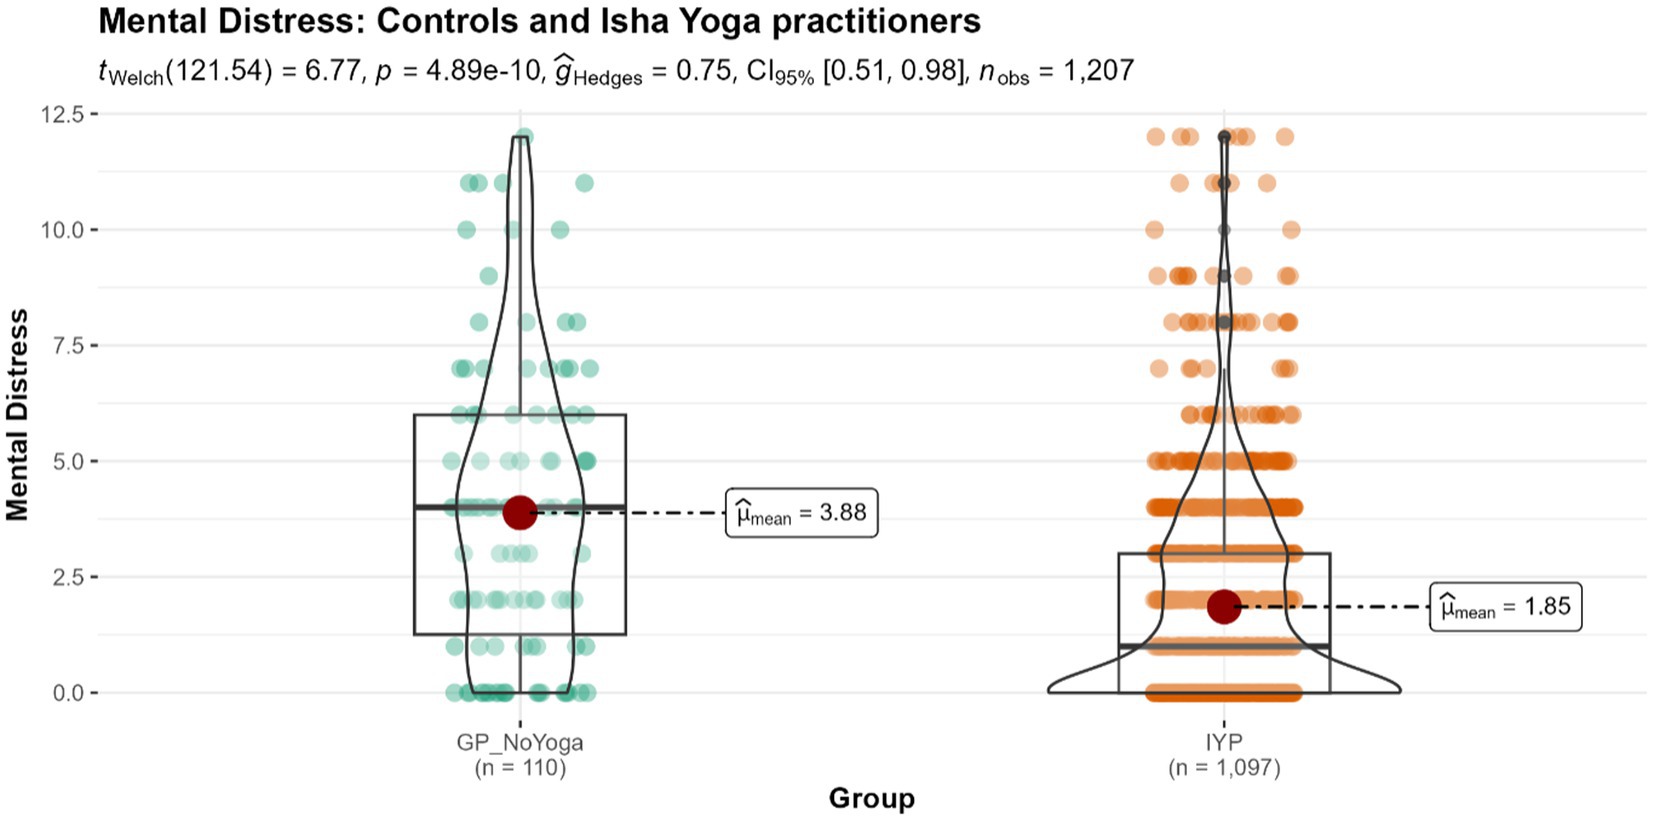 Yoga to Promote Mental Health in Occupational Health Settings